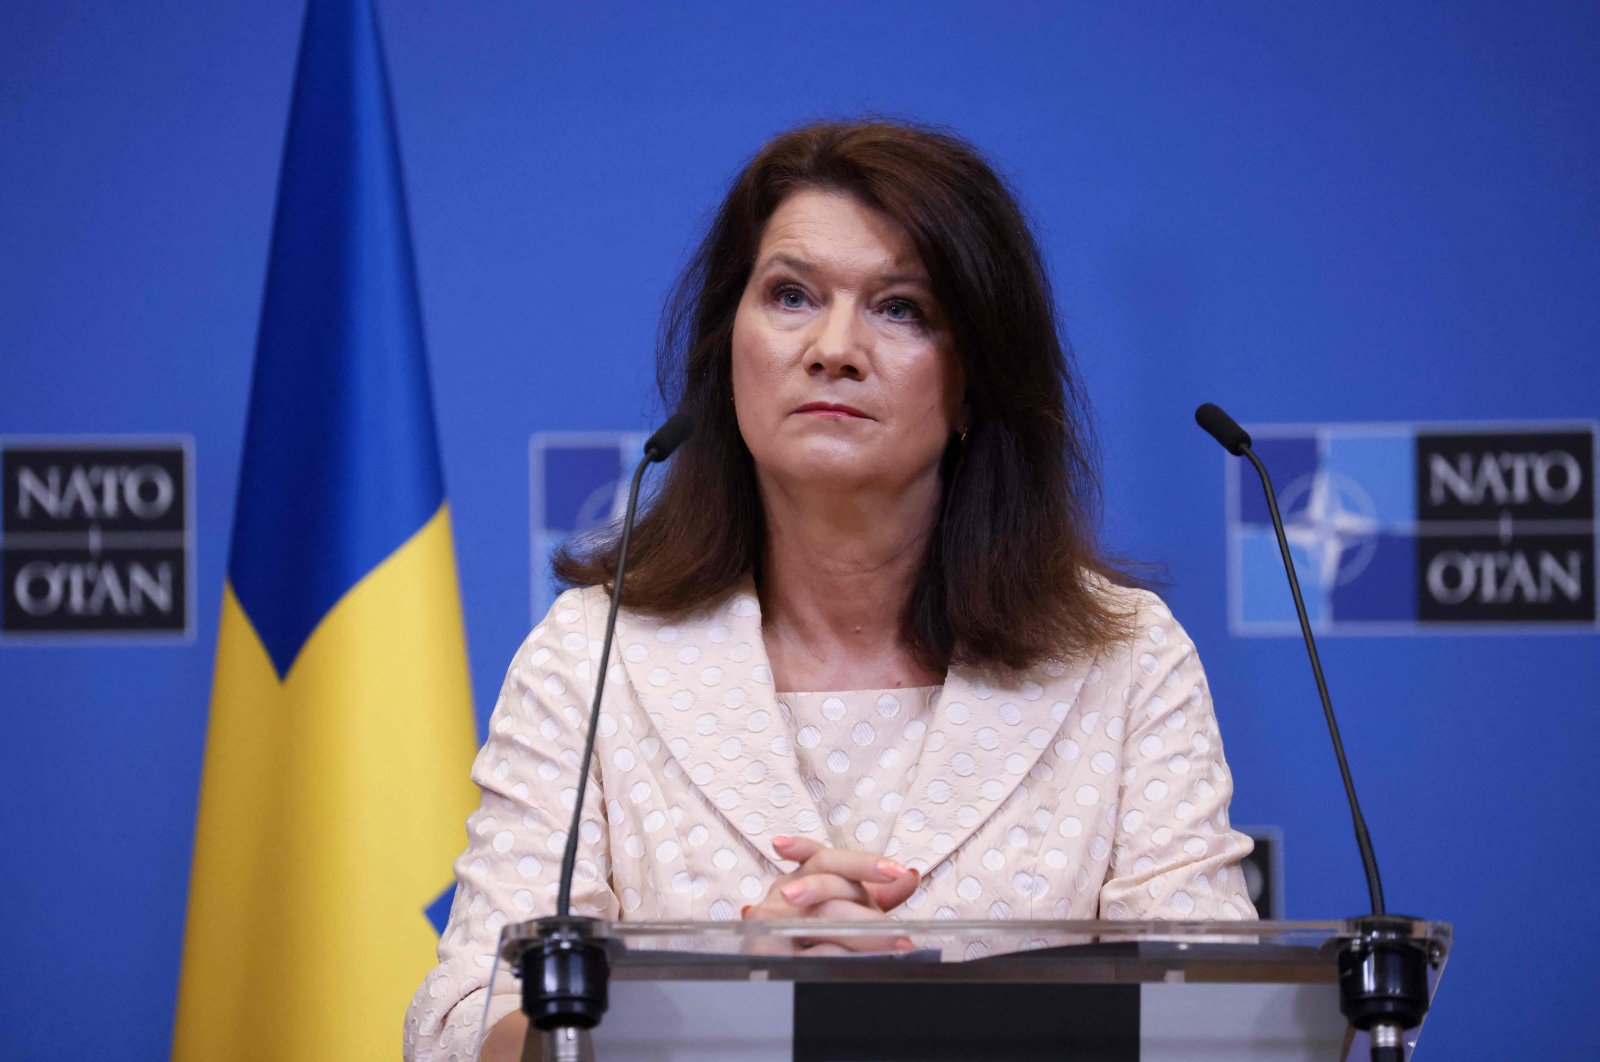 Swedish Foreign Minister Ann Linde gives a press conference after the signing of the accession protocols of Finland and Sweden at the NATO headquarters in Brussels, Belgium, July 5, 2022. (AFP Photo)